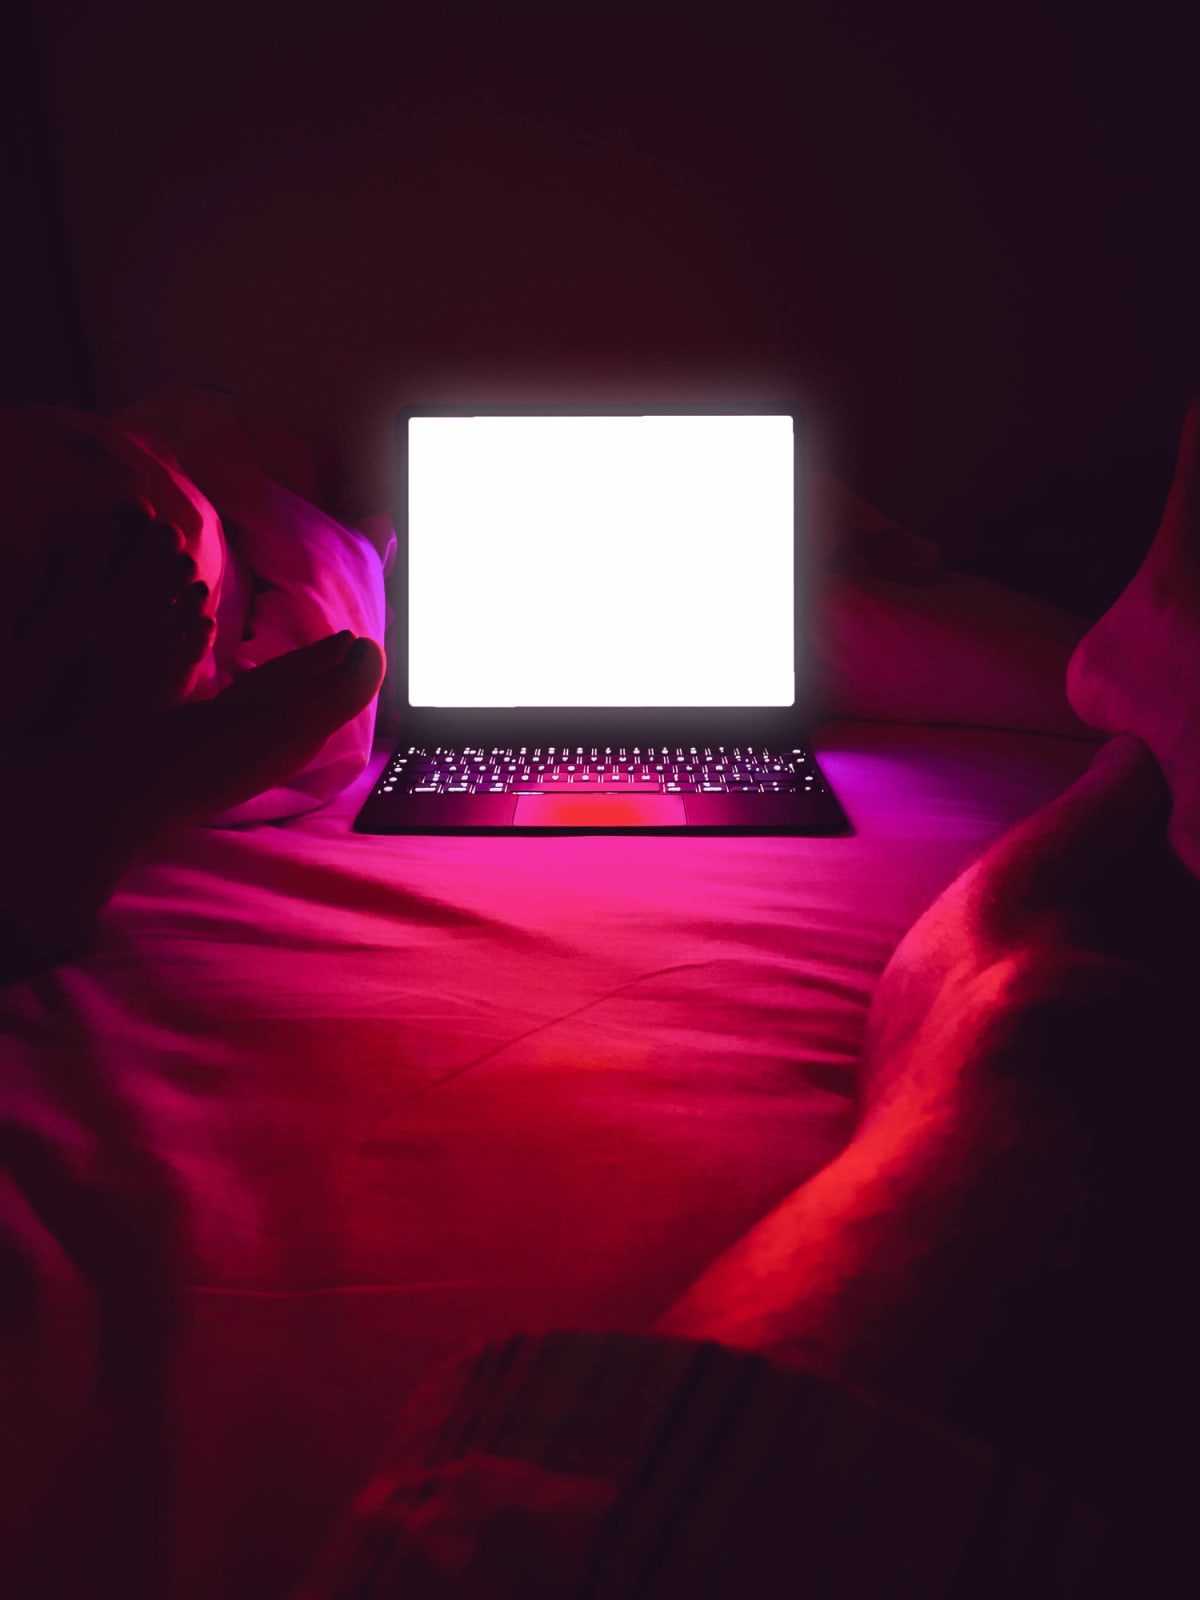 Adult couple watching series online in streaming platform bringin cinema at home, picture taken from personal perspective with legs and bright screen illuminating the bedroom with red light.